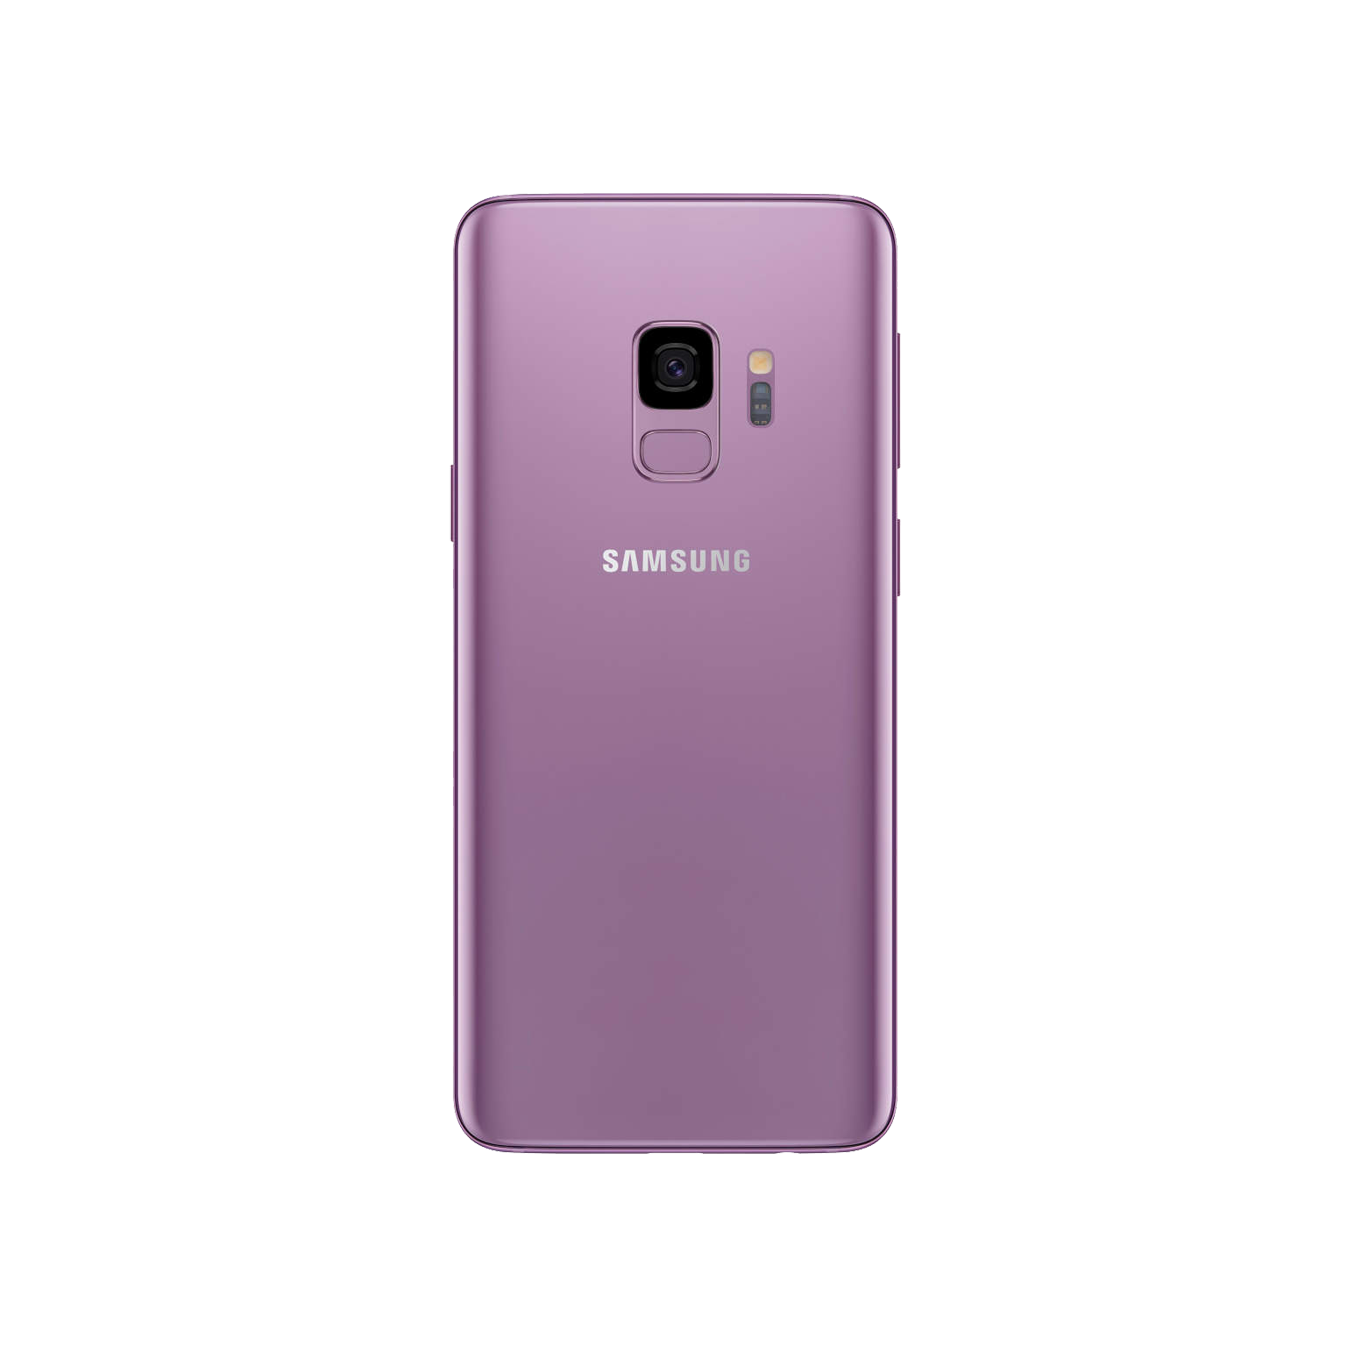 Samsung Galaxy S9 & S9 Plus network unlock, remove SIM restrictions for global use, available at cleanimei.com